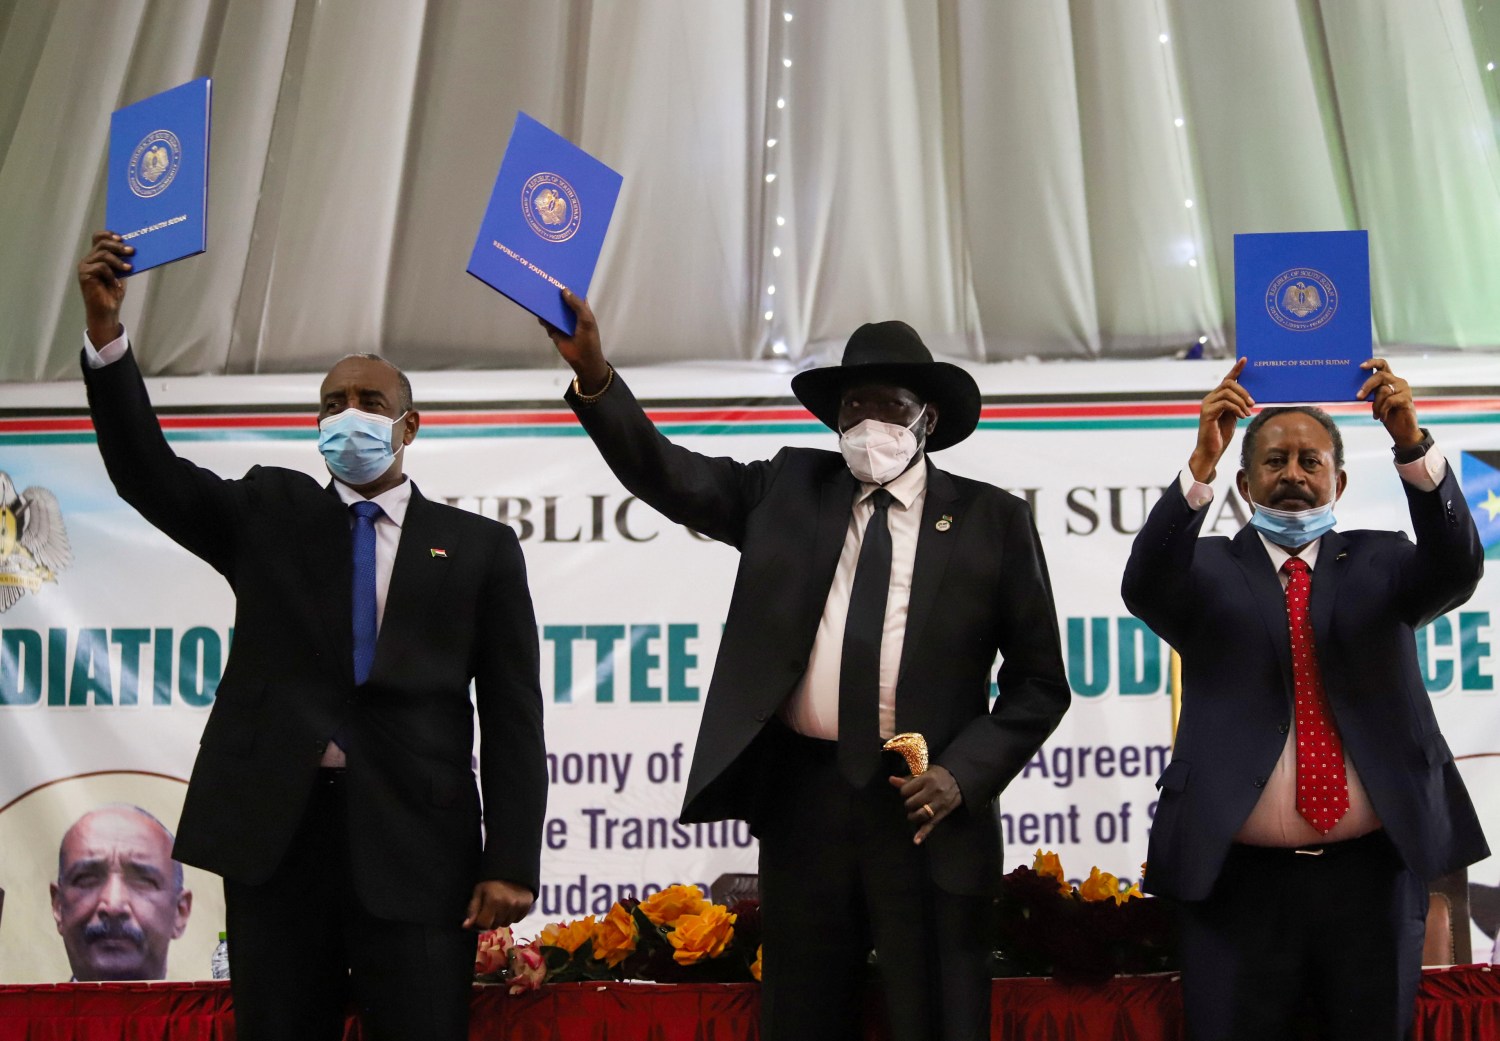 Sudan's Sovereign Council Chief General Abdel Fattah al-Burhan, South Sudan's President Salva Kiir, and Sudan's Prime Minister Abdalla Hamdok lift copies of a signed peace agreement with the country's five key rebel groups, a significant step towards resolving deep-rooted conflicts that raged under former leader Omar al-Bashir, in Juba, South Sudan August 31, 2020. REUTERS/Samir Bol